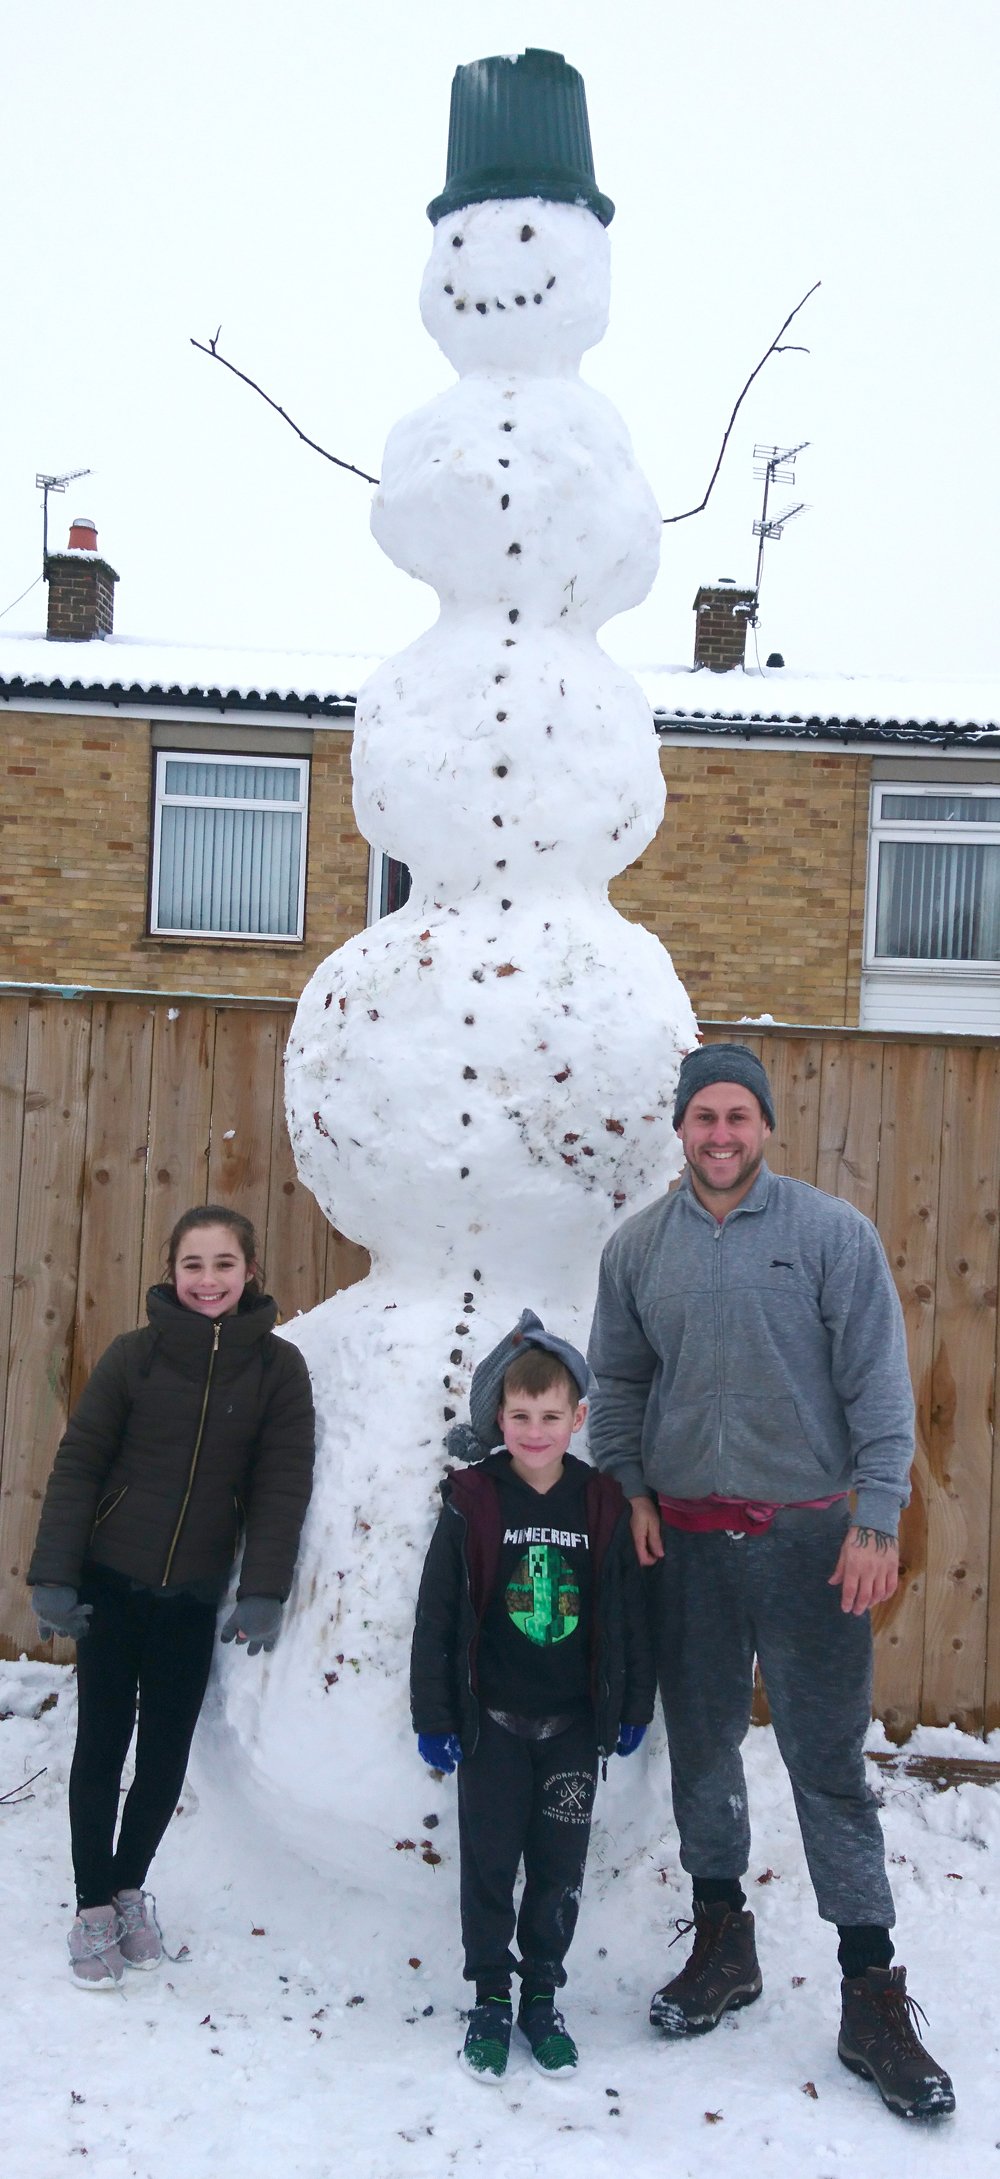 Is this Aycliffe’s Biggest Snowman?